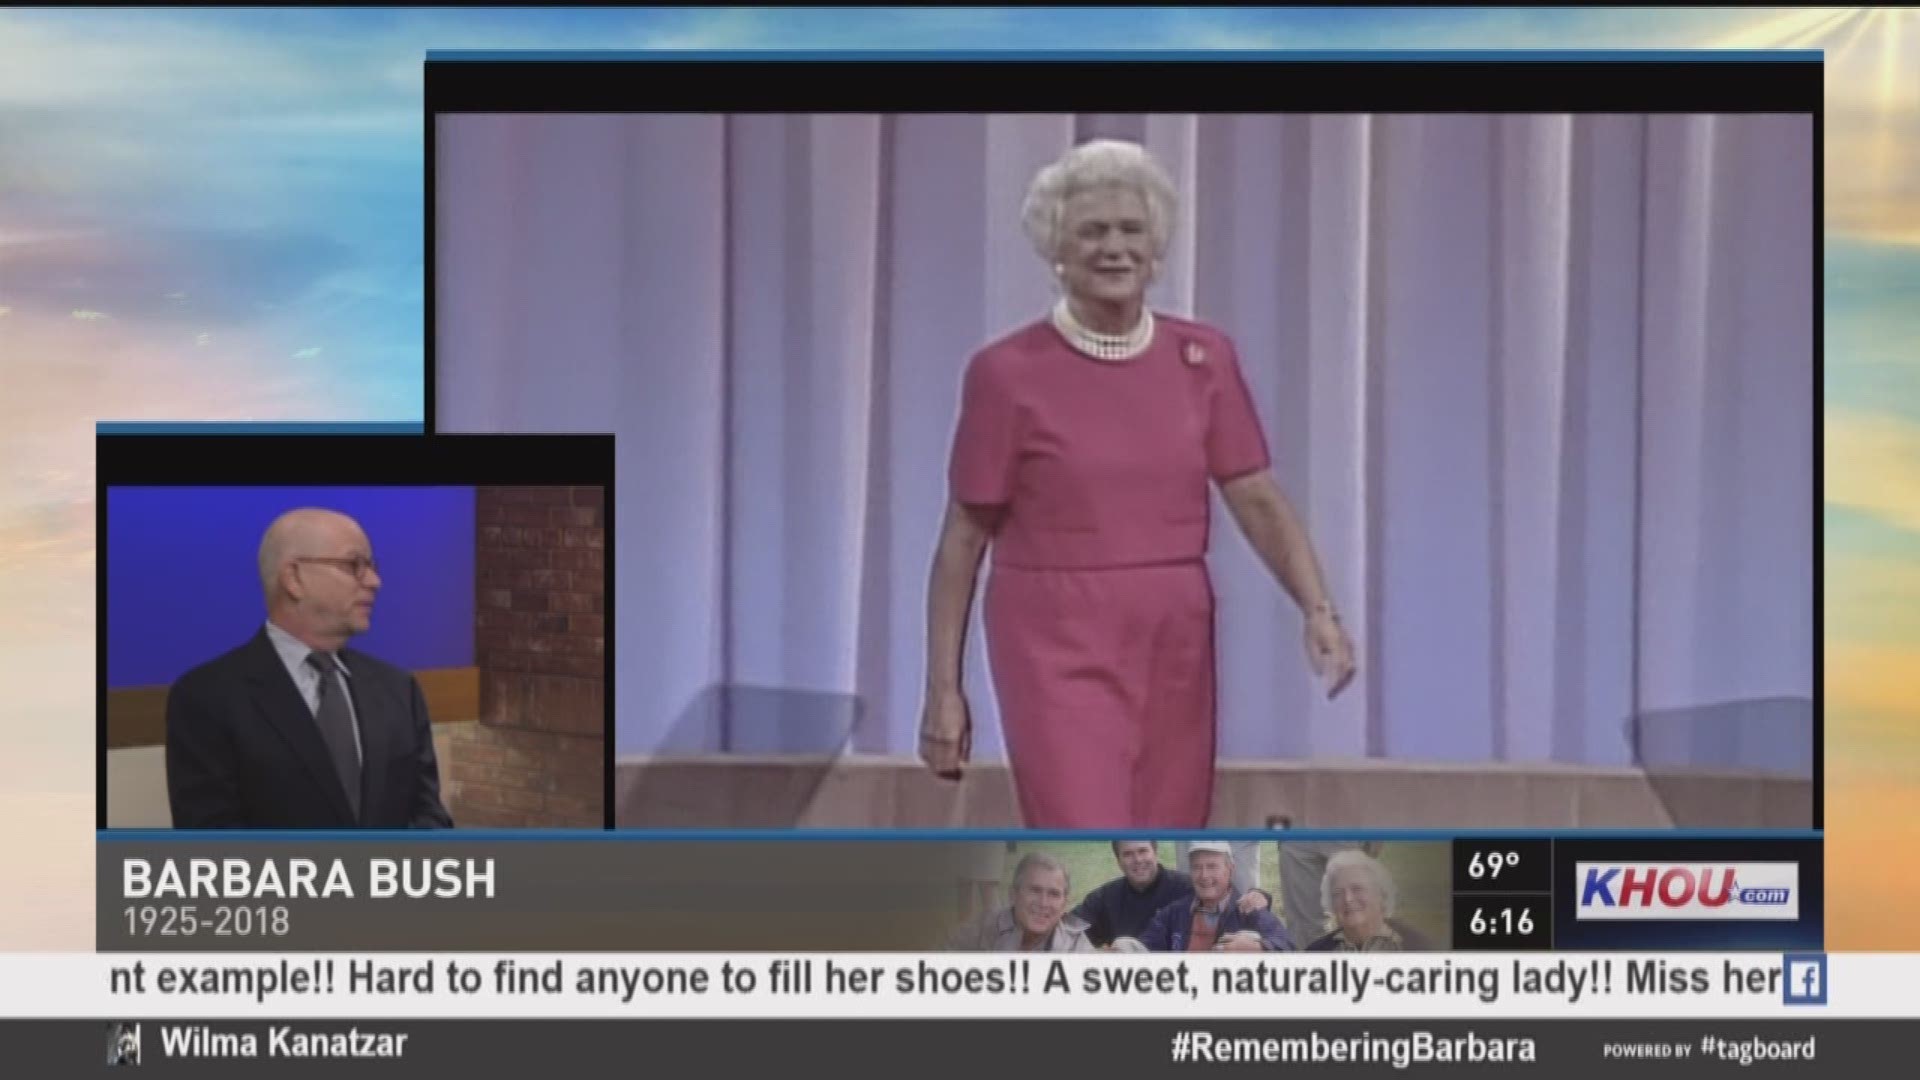 We're taking a look back at the legacy of former First Lady Barbara Bush. We know she had a huge impact here in Houston and across the country. Our KHOU political analyst Bob Stein joins the morning team Wednesday.